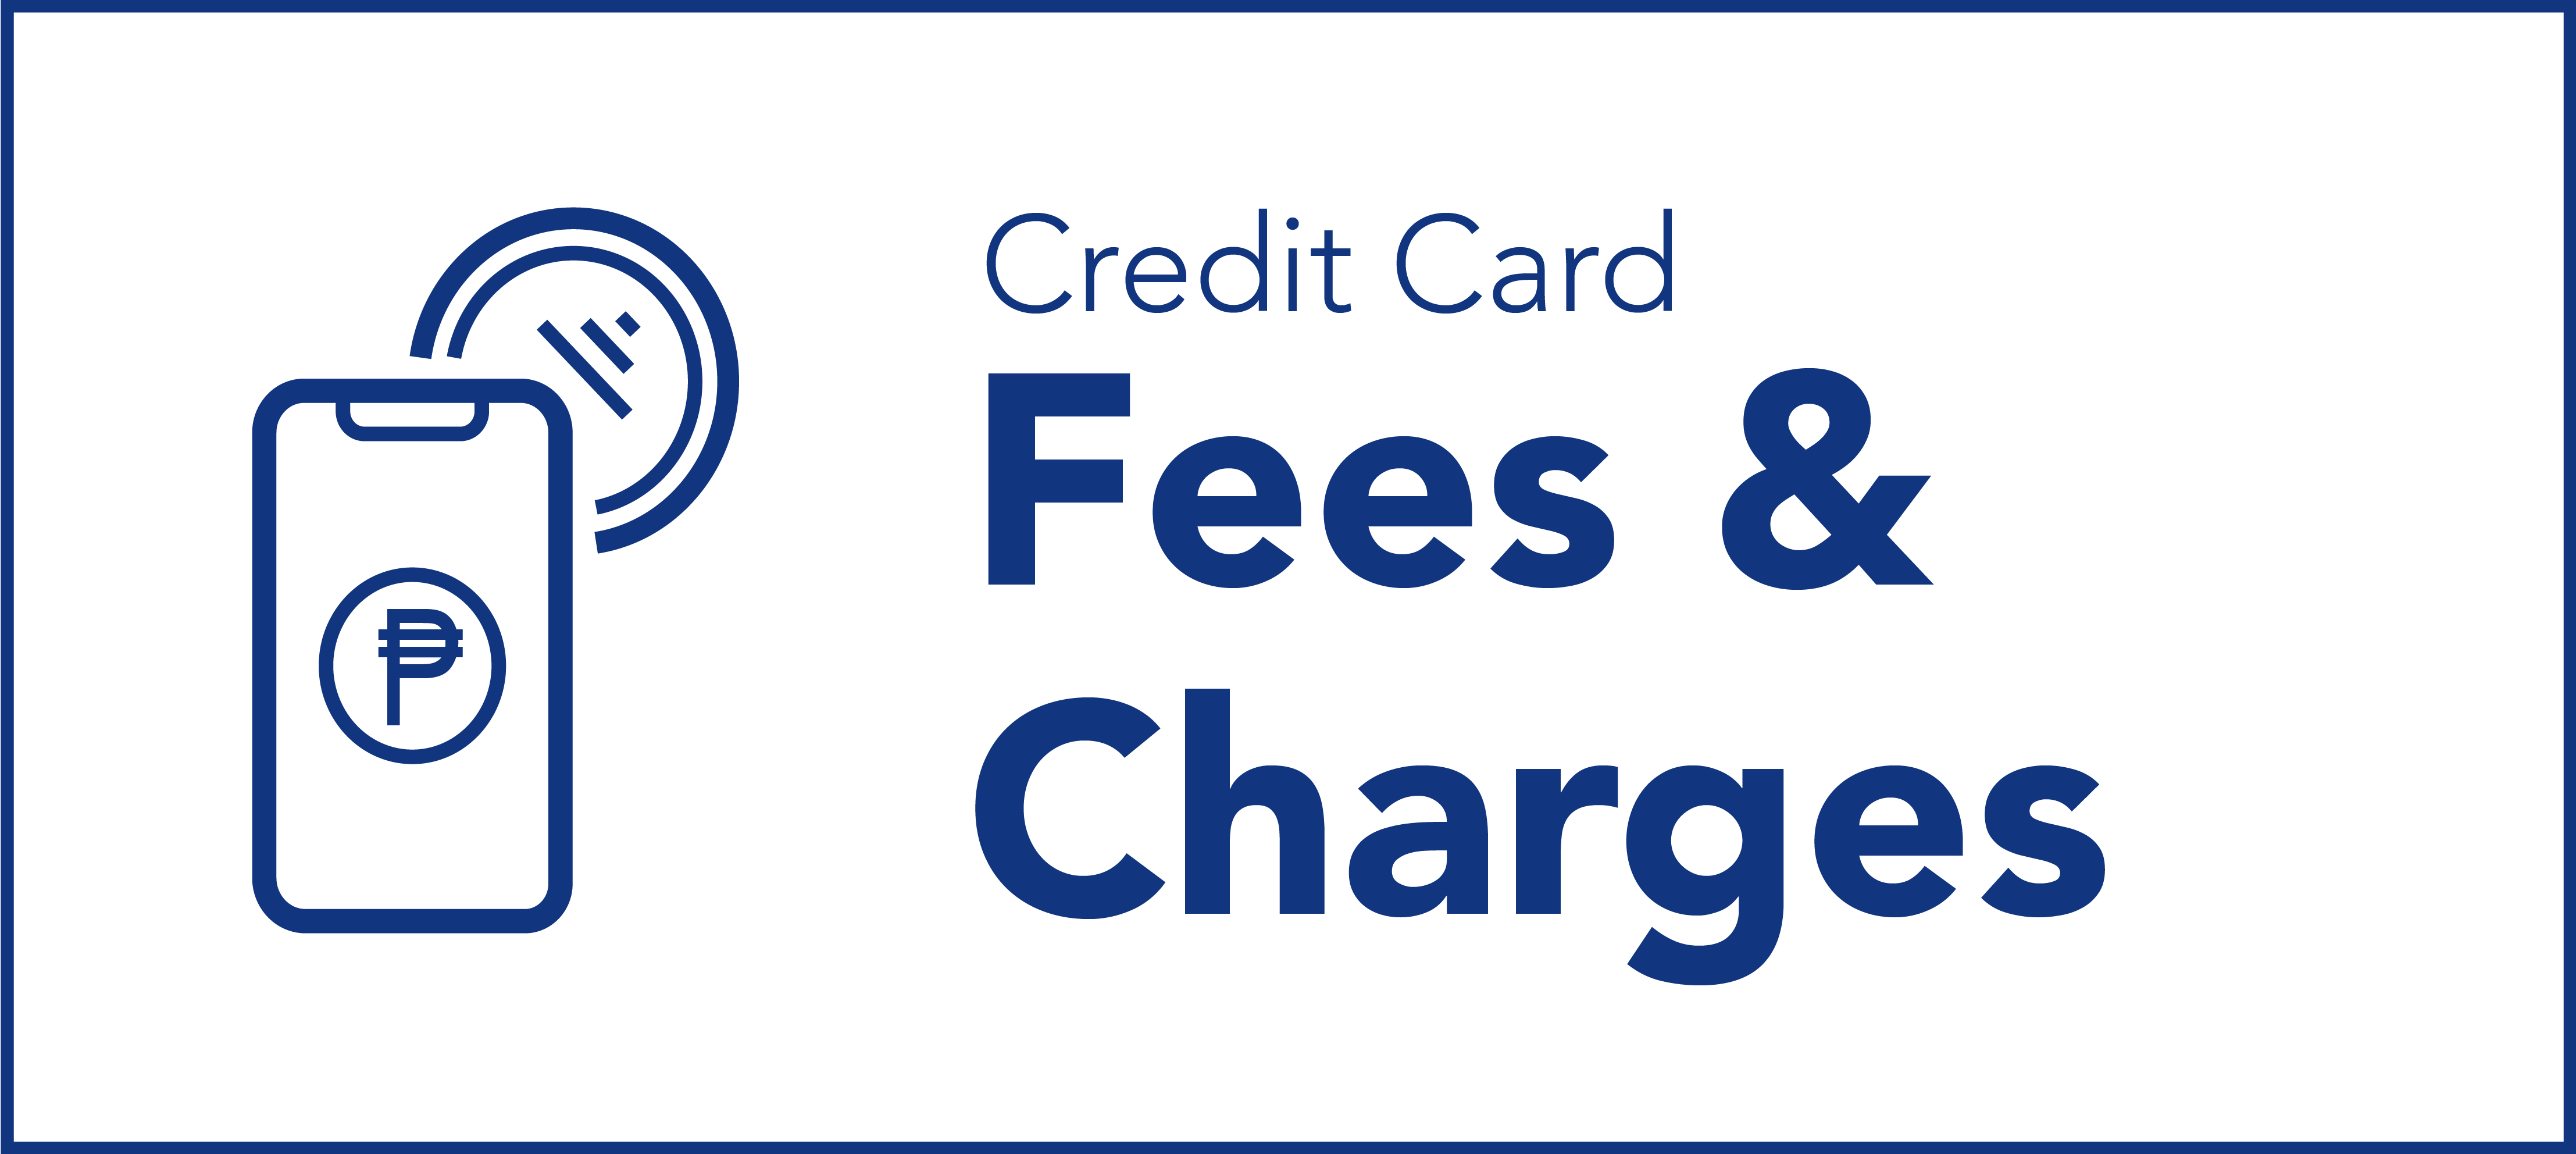 Applicable Credit Card Fees and Charges